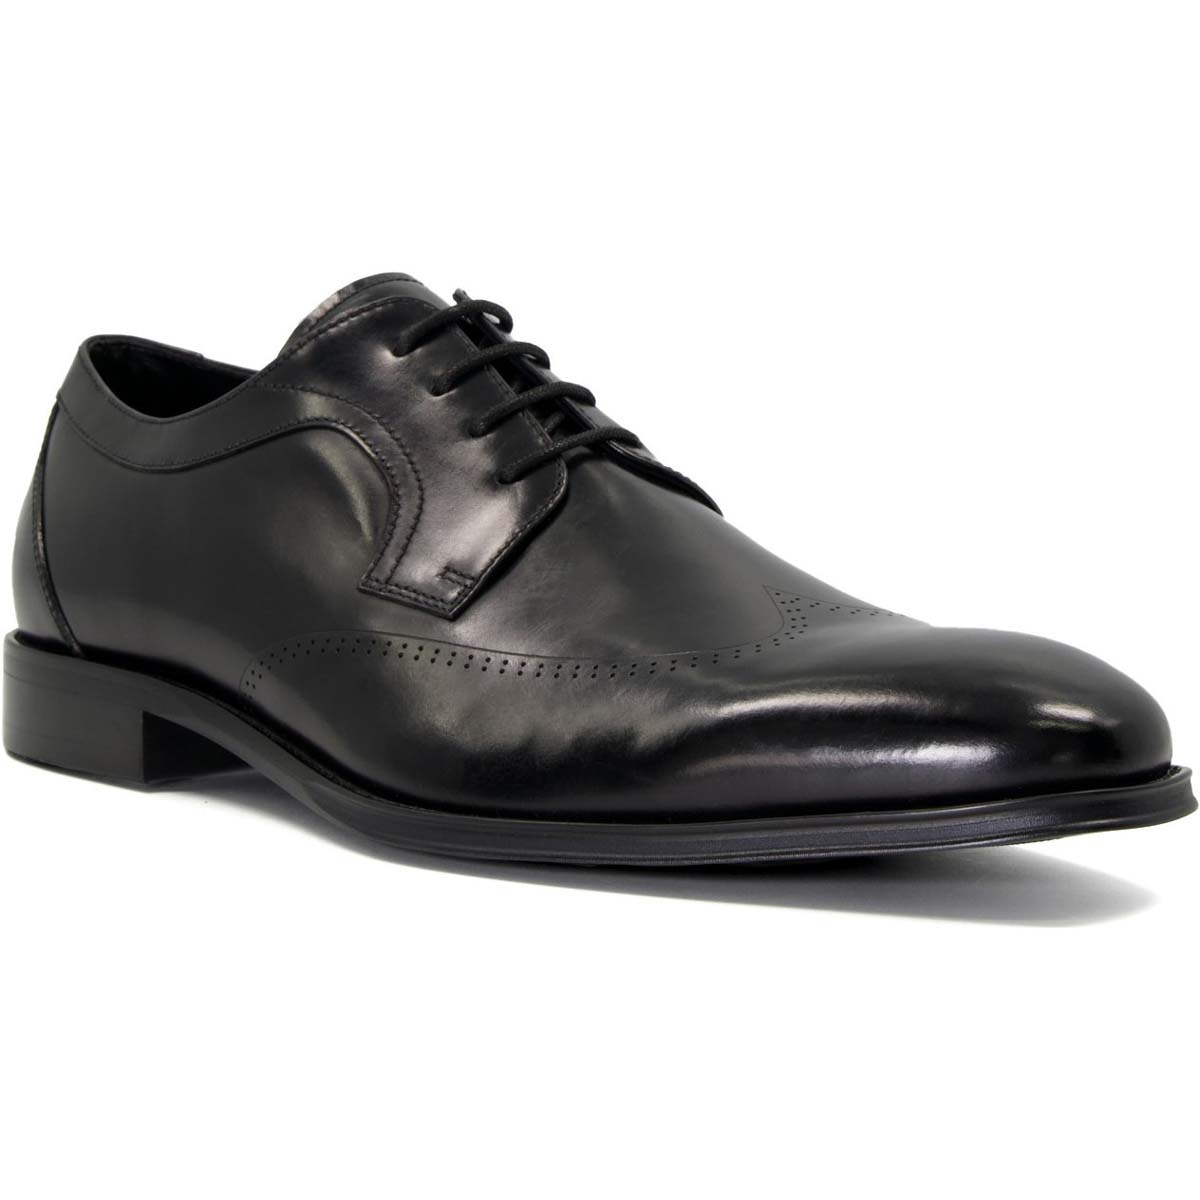 Dune London Sheath Black Mens formal shoes 2775095201744 in a Plain Leather in Size 11